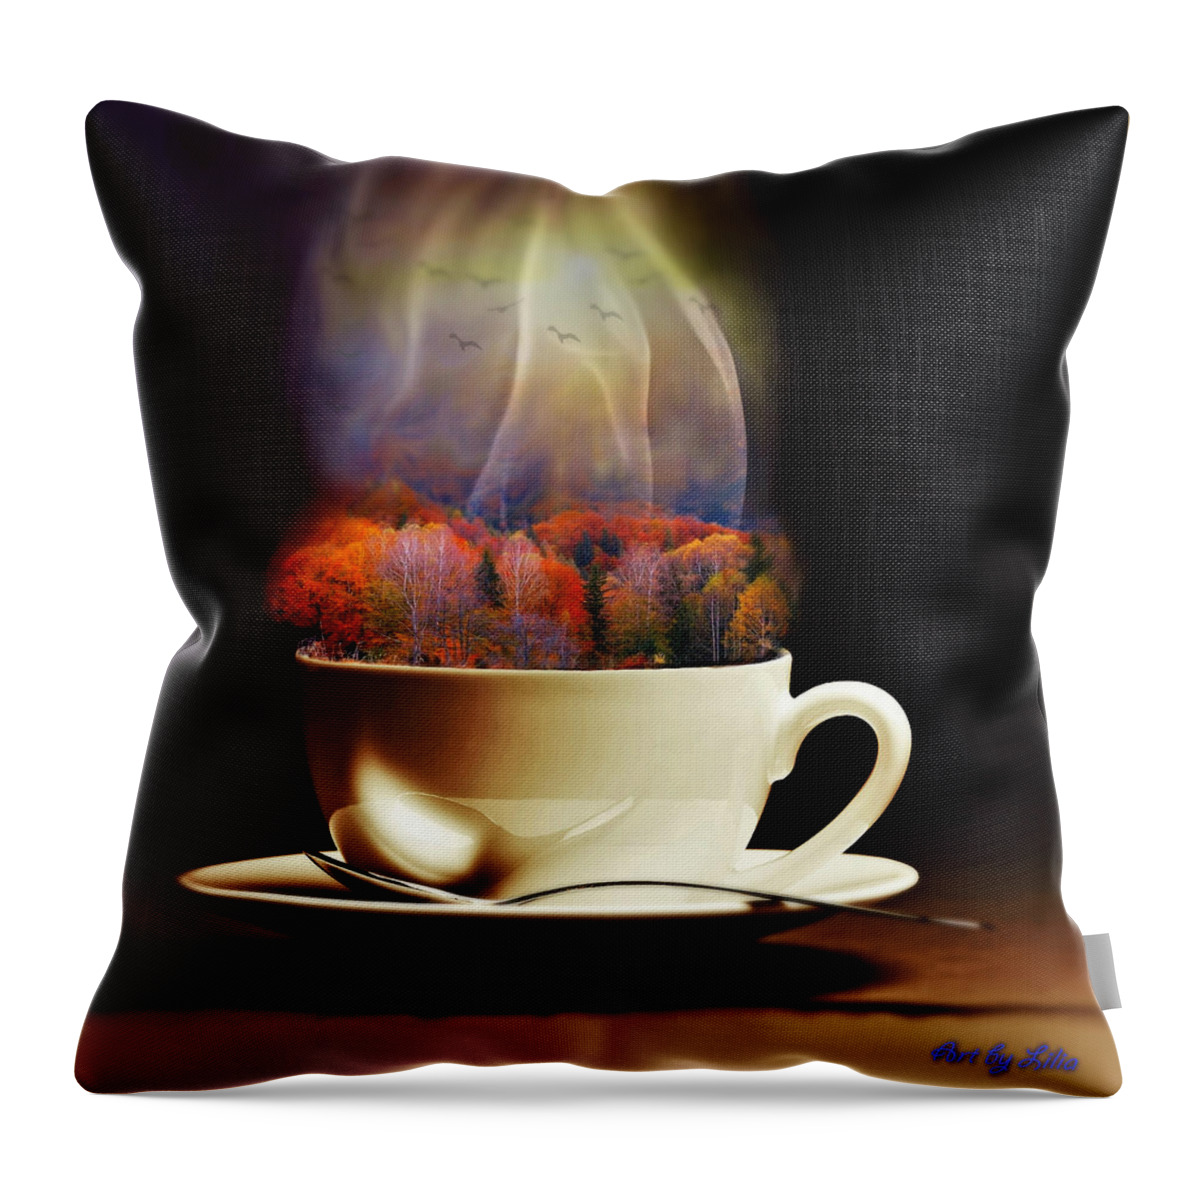 Nature Throw Pillow featuring the digital art Cup of Autumn by Lilia S